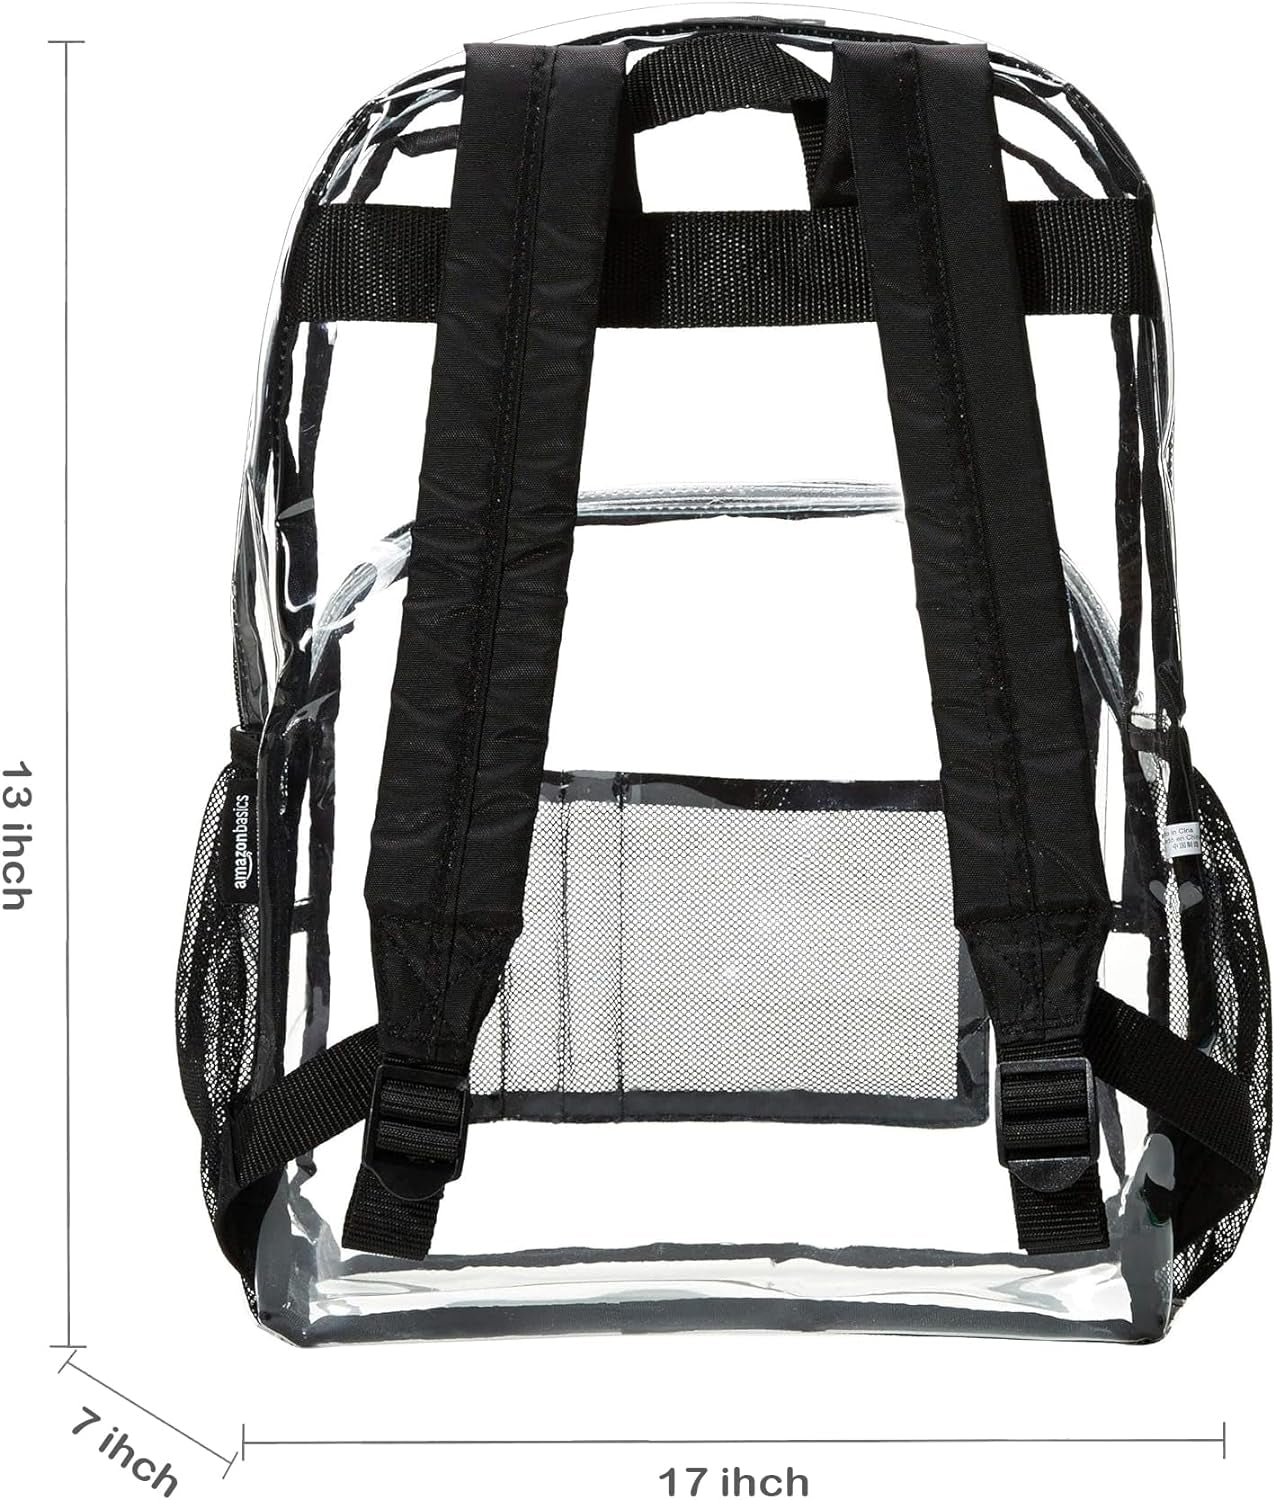 Transparent School Backpack, with Water-Resistant PVC Plastic Material and Ruggedly Ruinforced Shoulder Straps, Clear